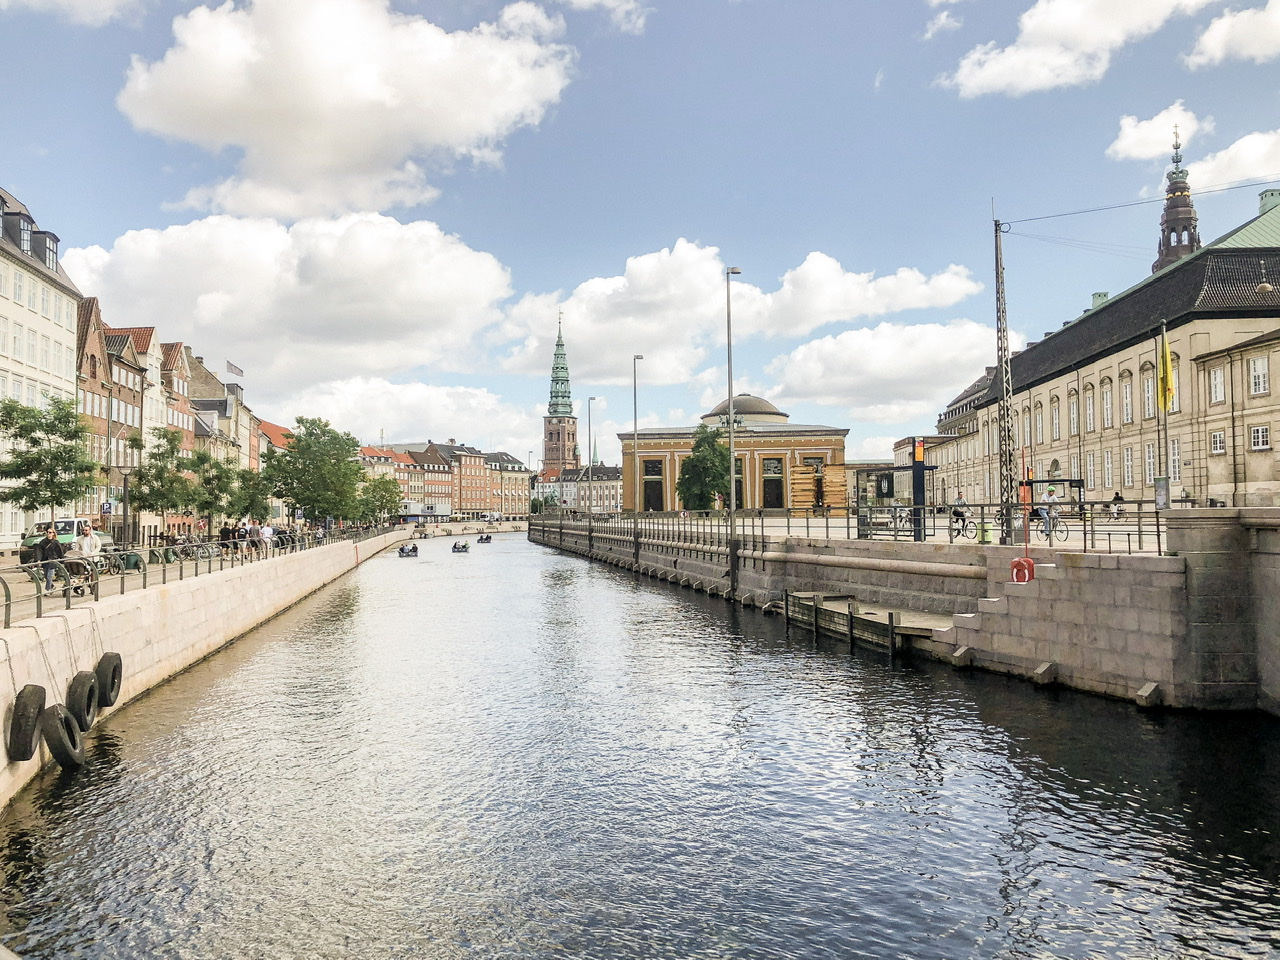 Canal in Copenhagen with waterfront buildings and church spire visible alongside